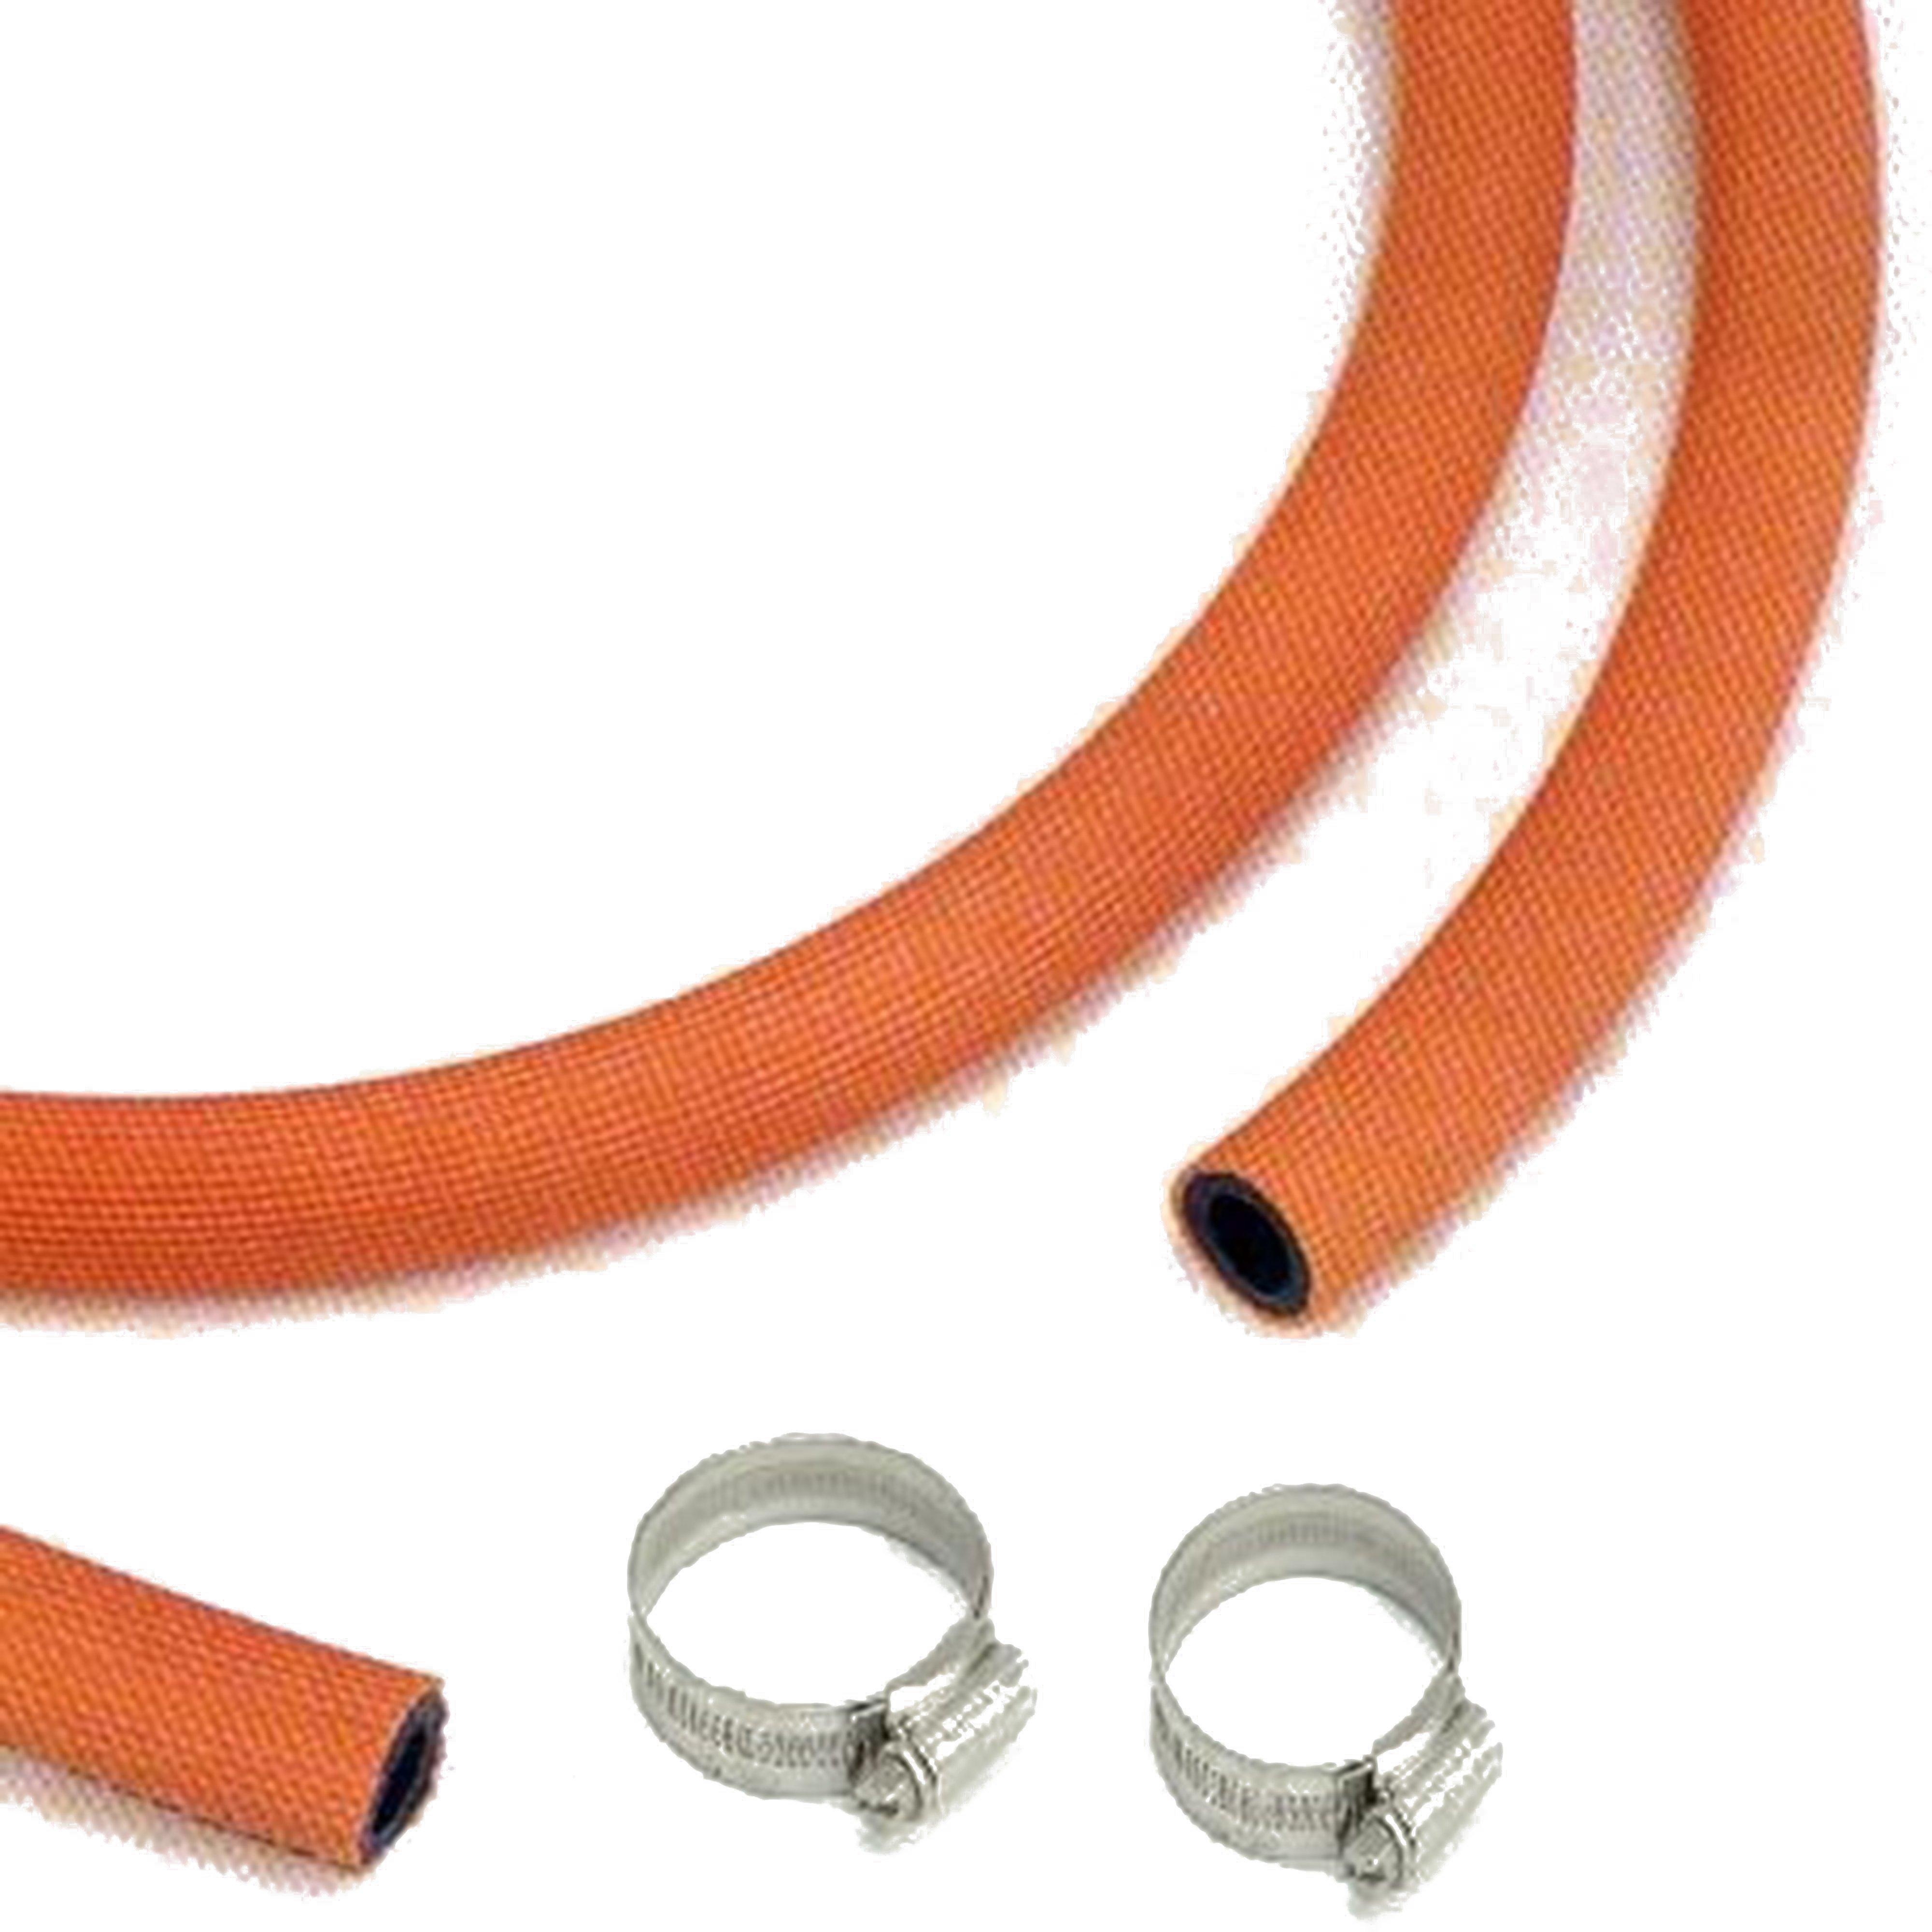 Continental GAS HOSE AND 2 Review